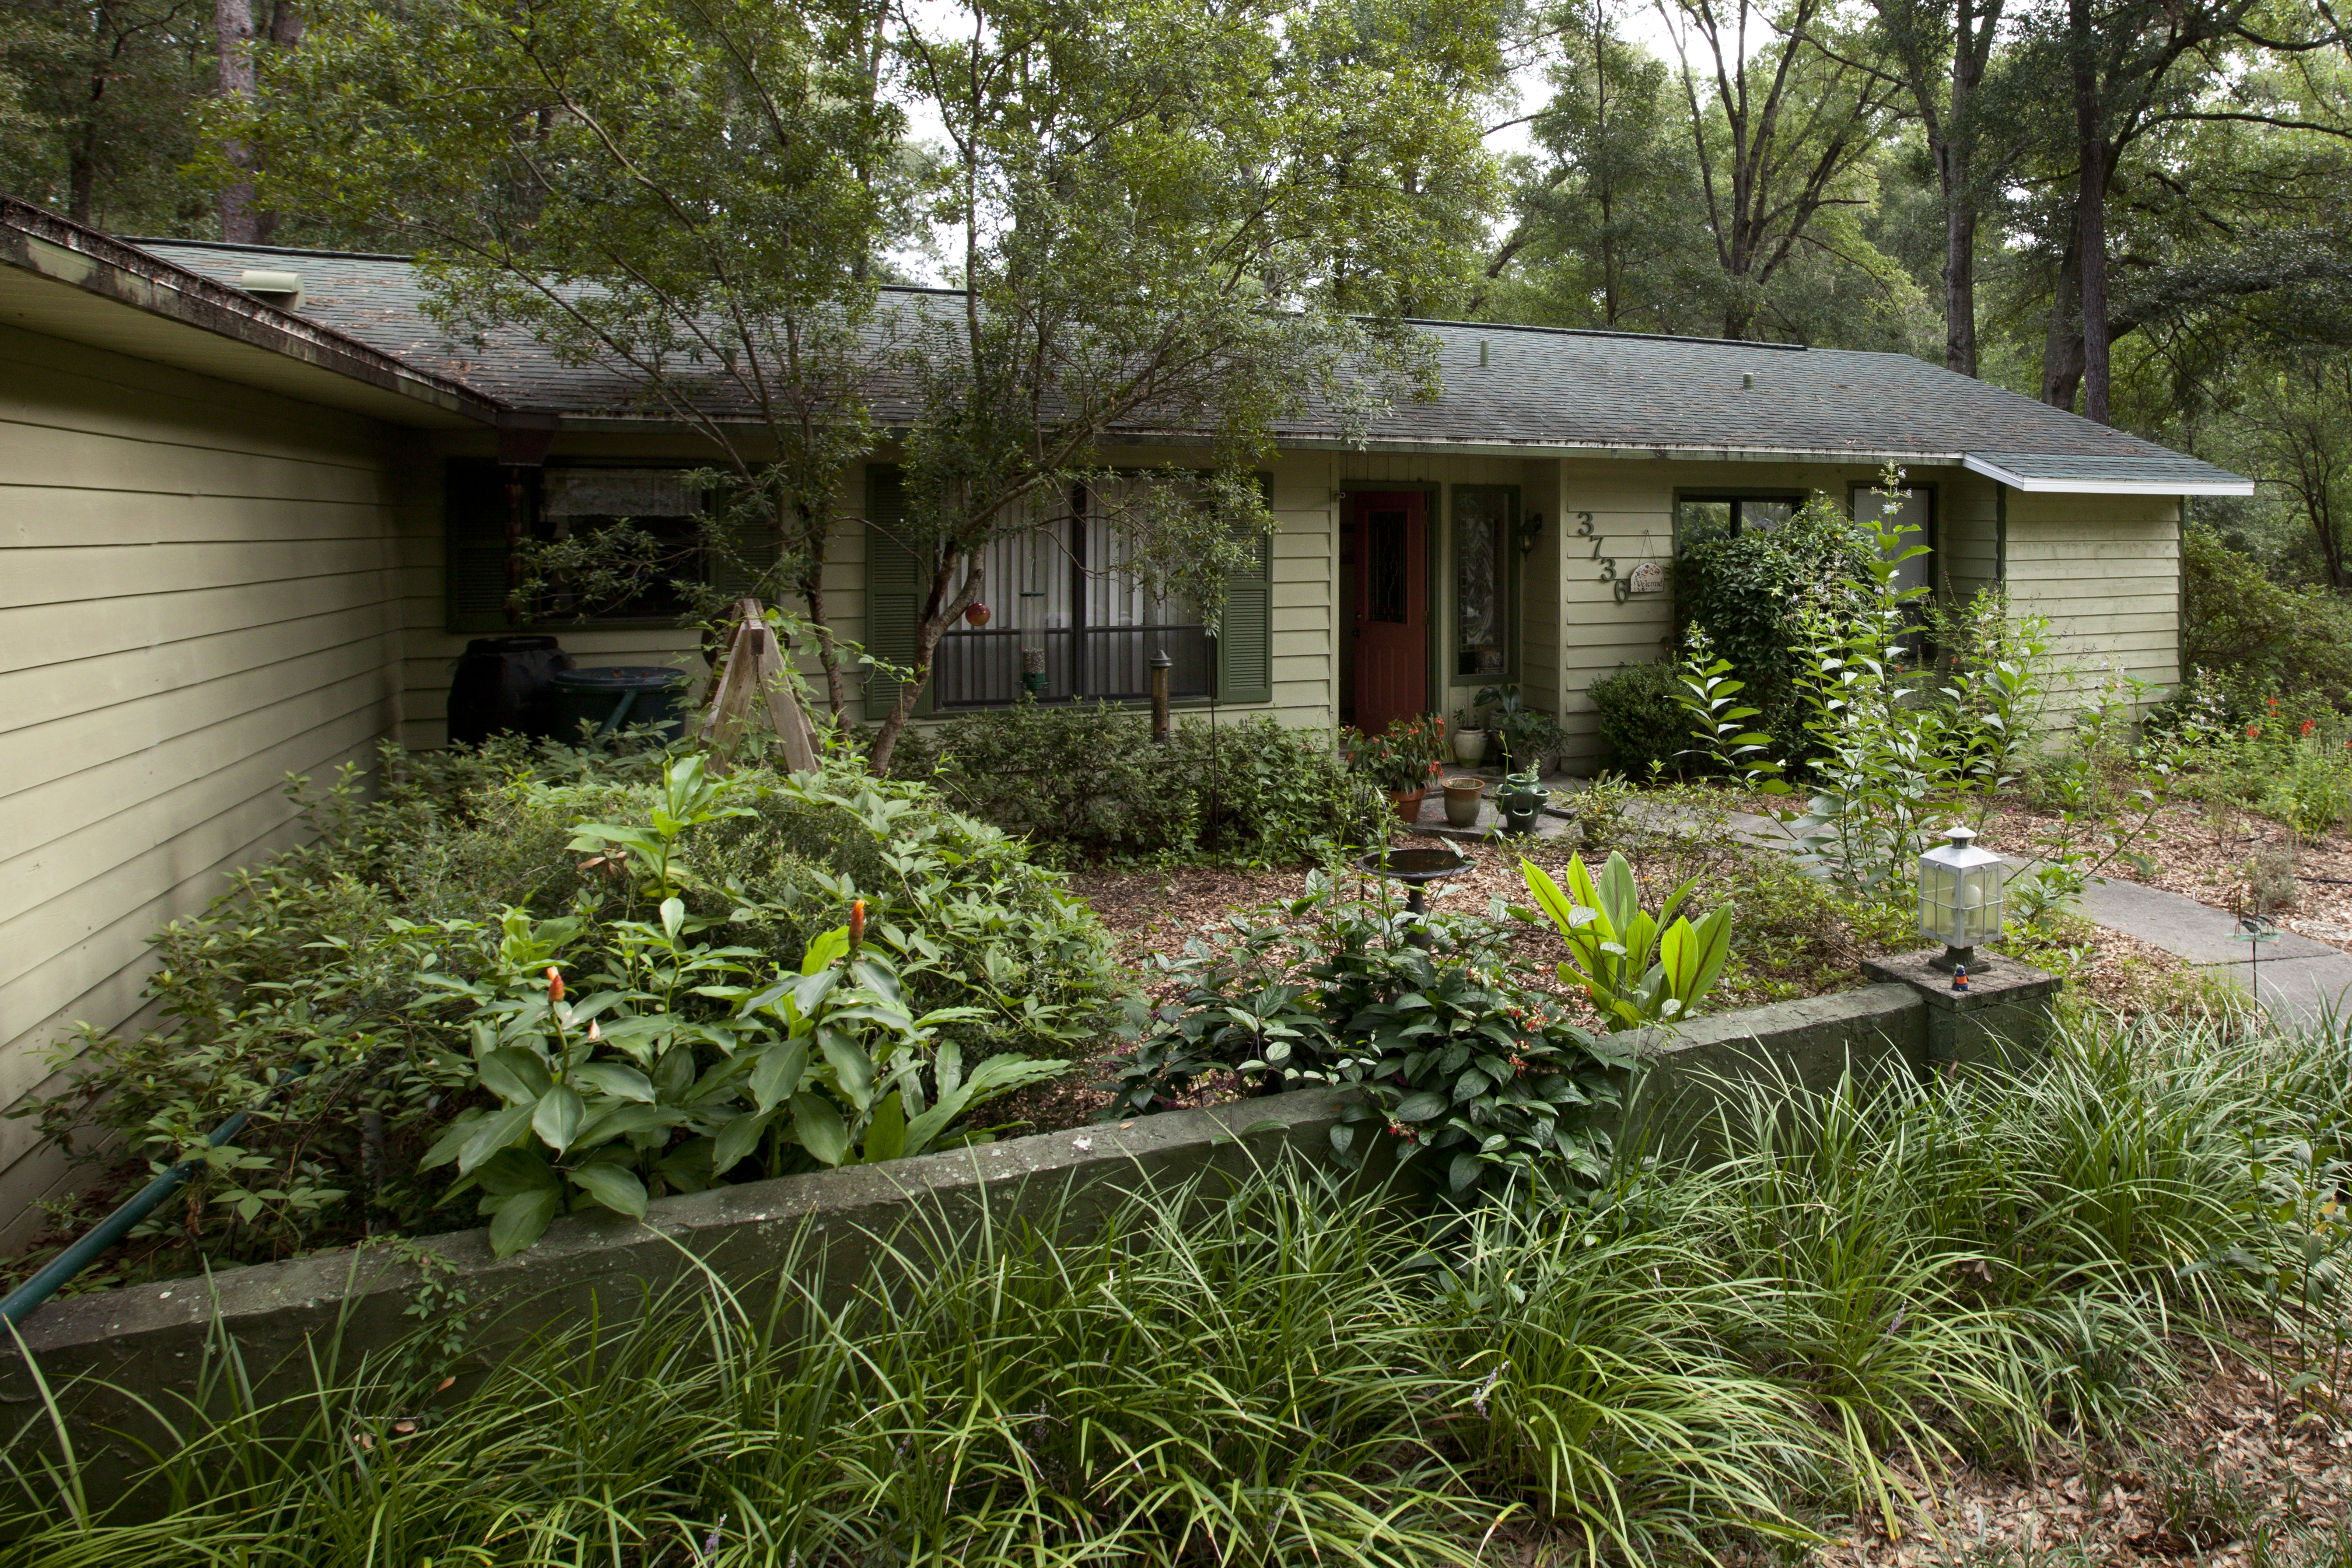 A Florida-Friendly yard which has an alternative lawn and native biodiversity.